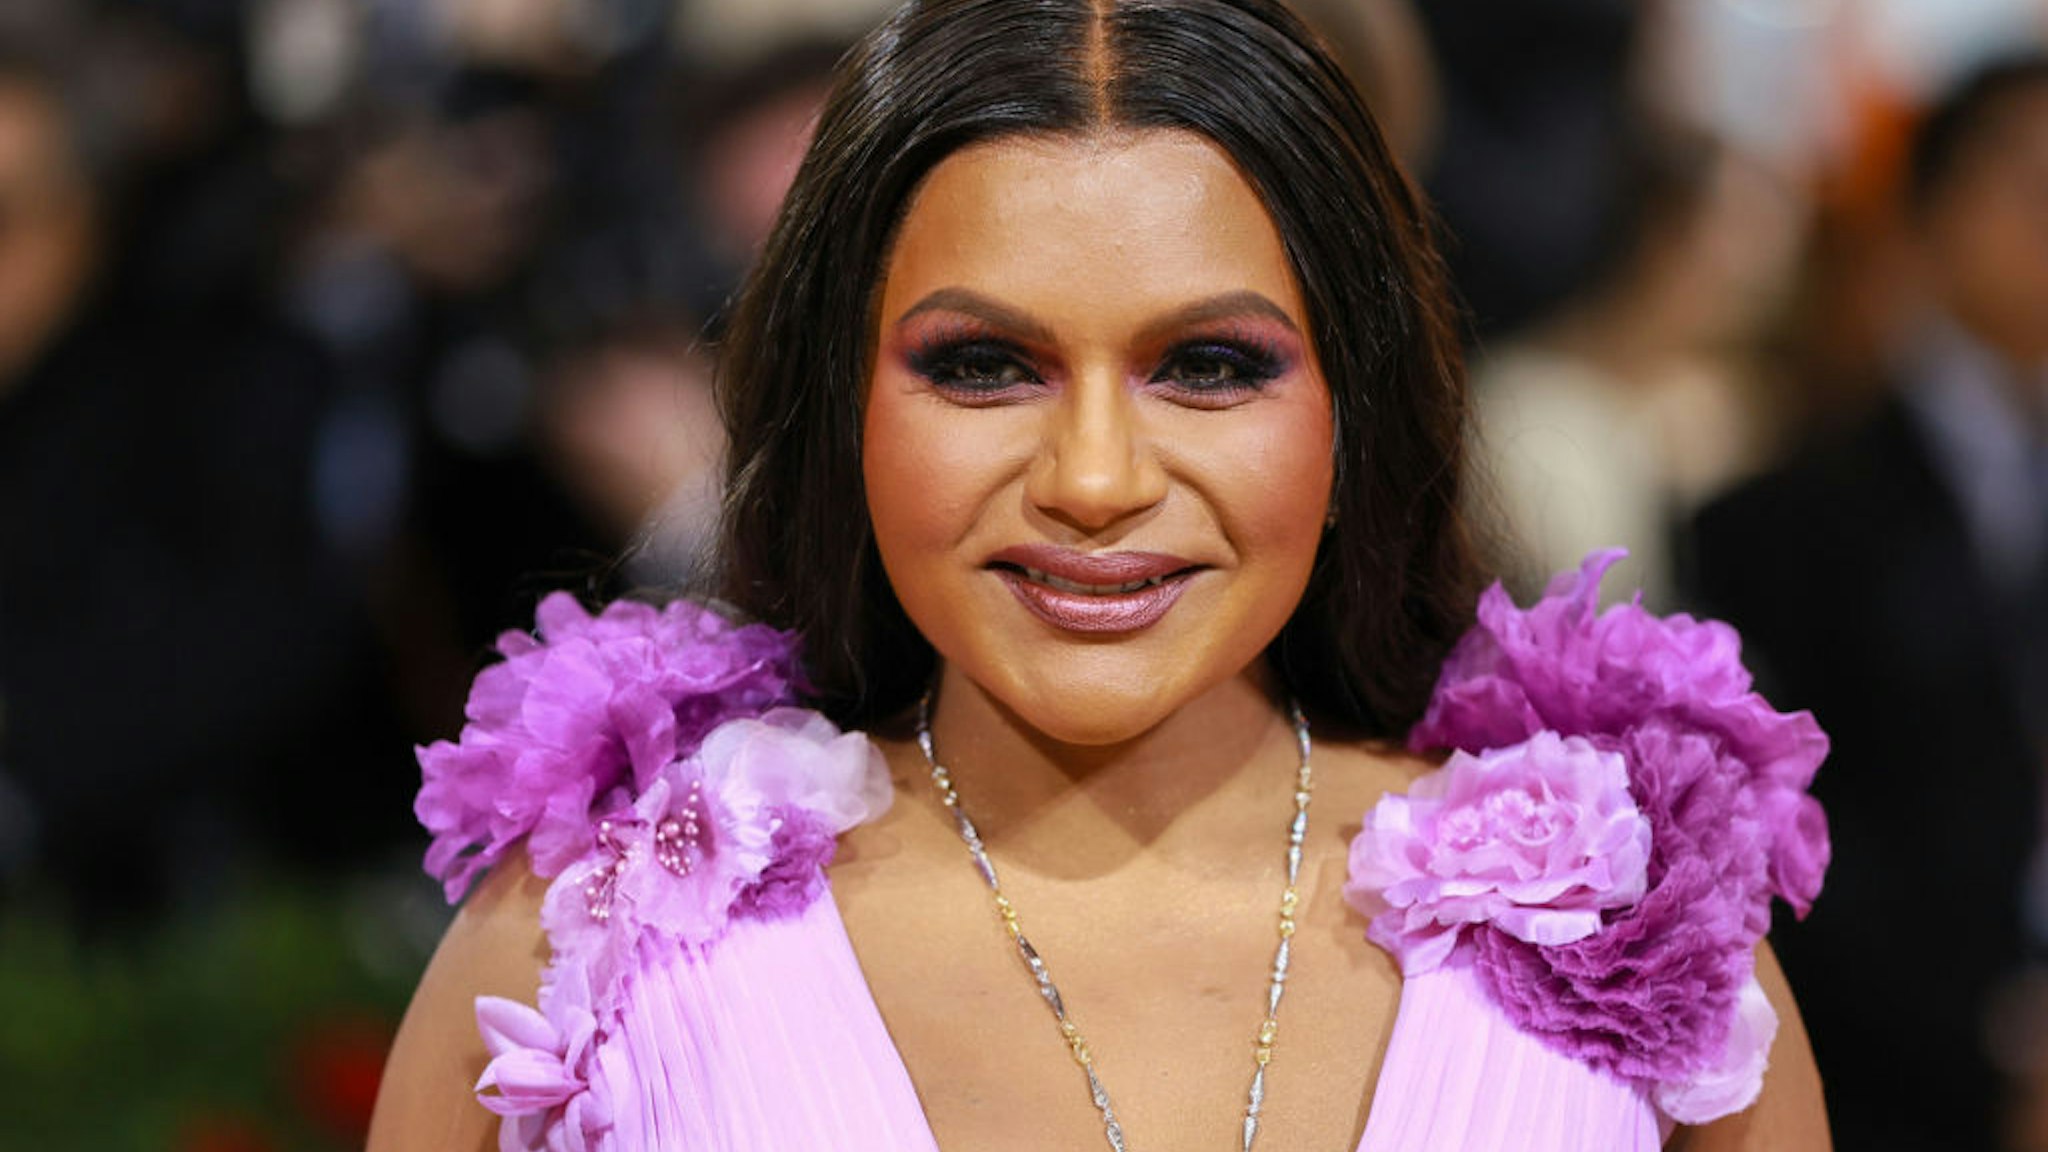 Mindy Kaling attends The 2022 Met Gala Celebrating "In America: An Anthology of Fashion" at The Metropolitan Museum of Art on May 02, 2022 in New York City.